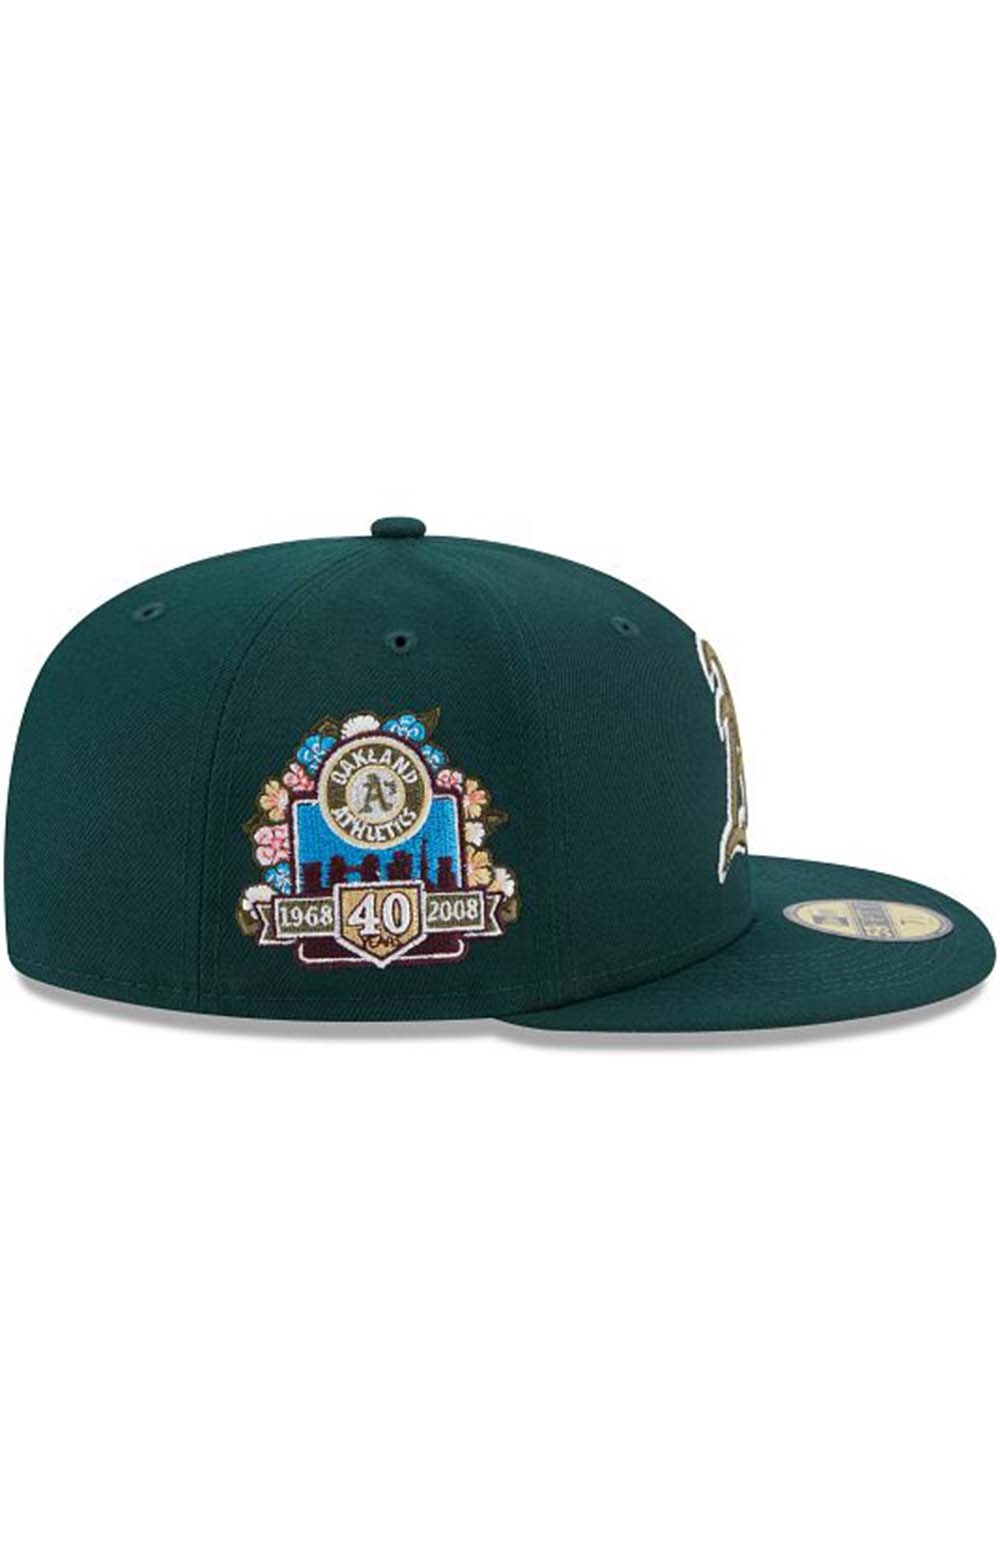 Oakland Athletics Botanical 59Fifty Fitted Cap